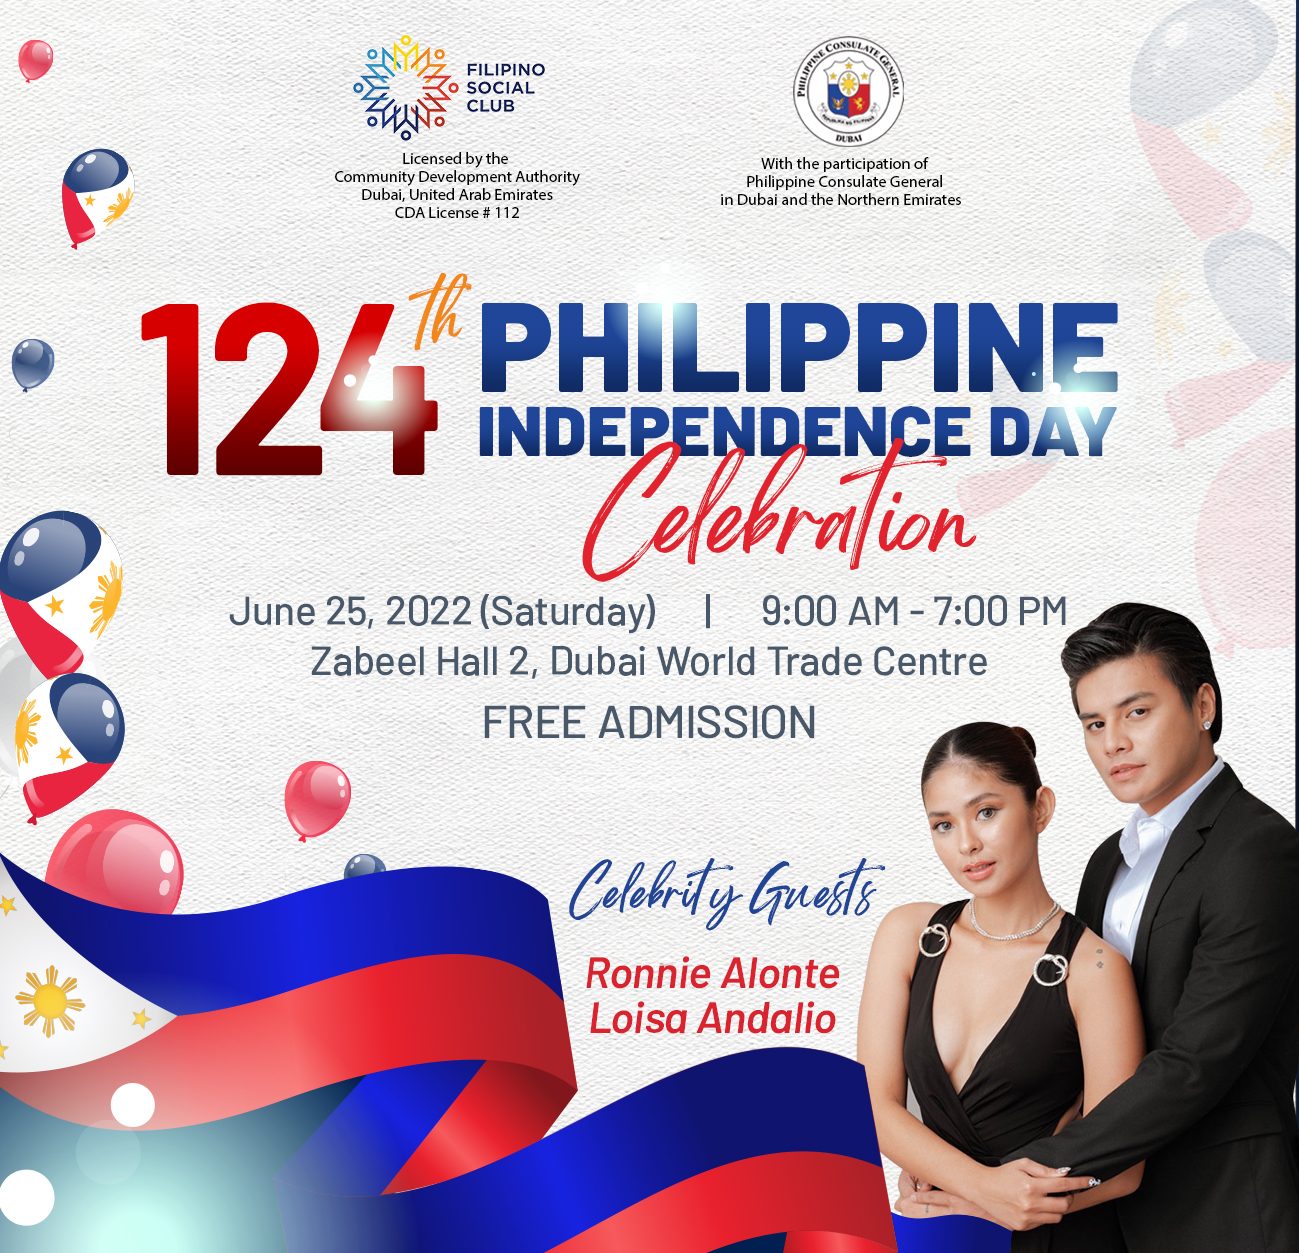 Funfilled 124th Philippine Independence Day all set for June 25 The